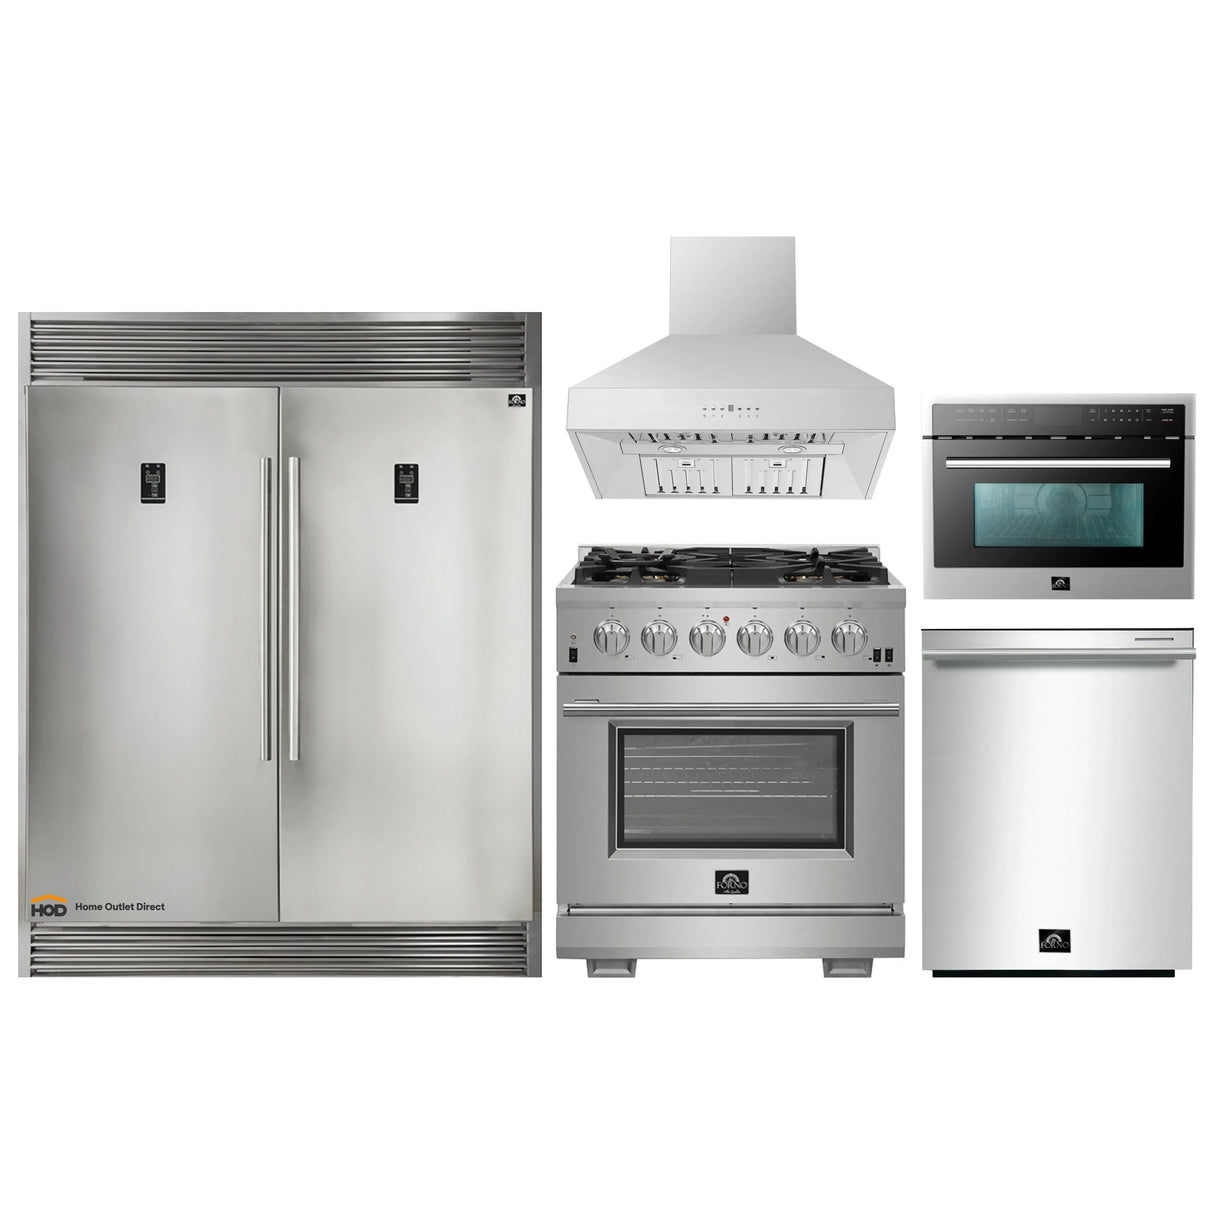 Forno 5-Piece Pro Appliance Package - 30-Inch Gas Range, 56-Inch Pro-Style Refrigerator, Wall Mount Hood, Microwave Oven, & 3-Rack Dishwasher in Stainless Steel